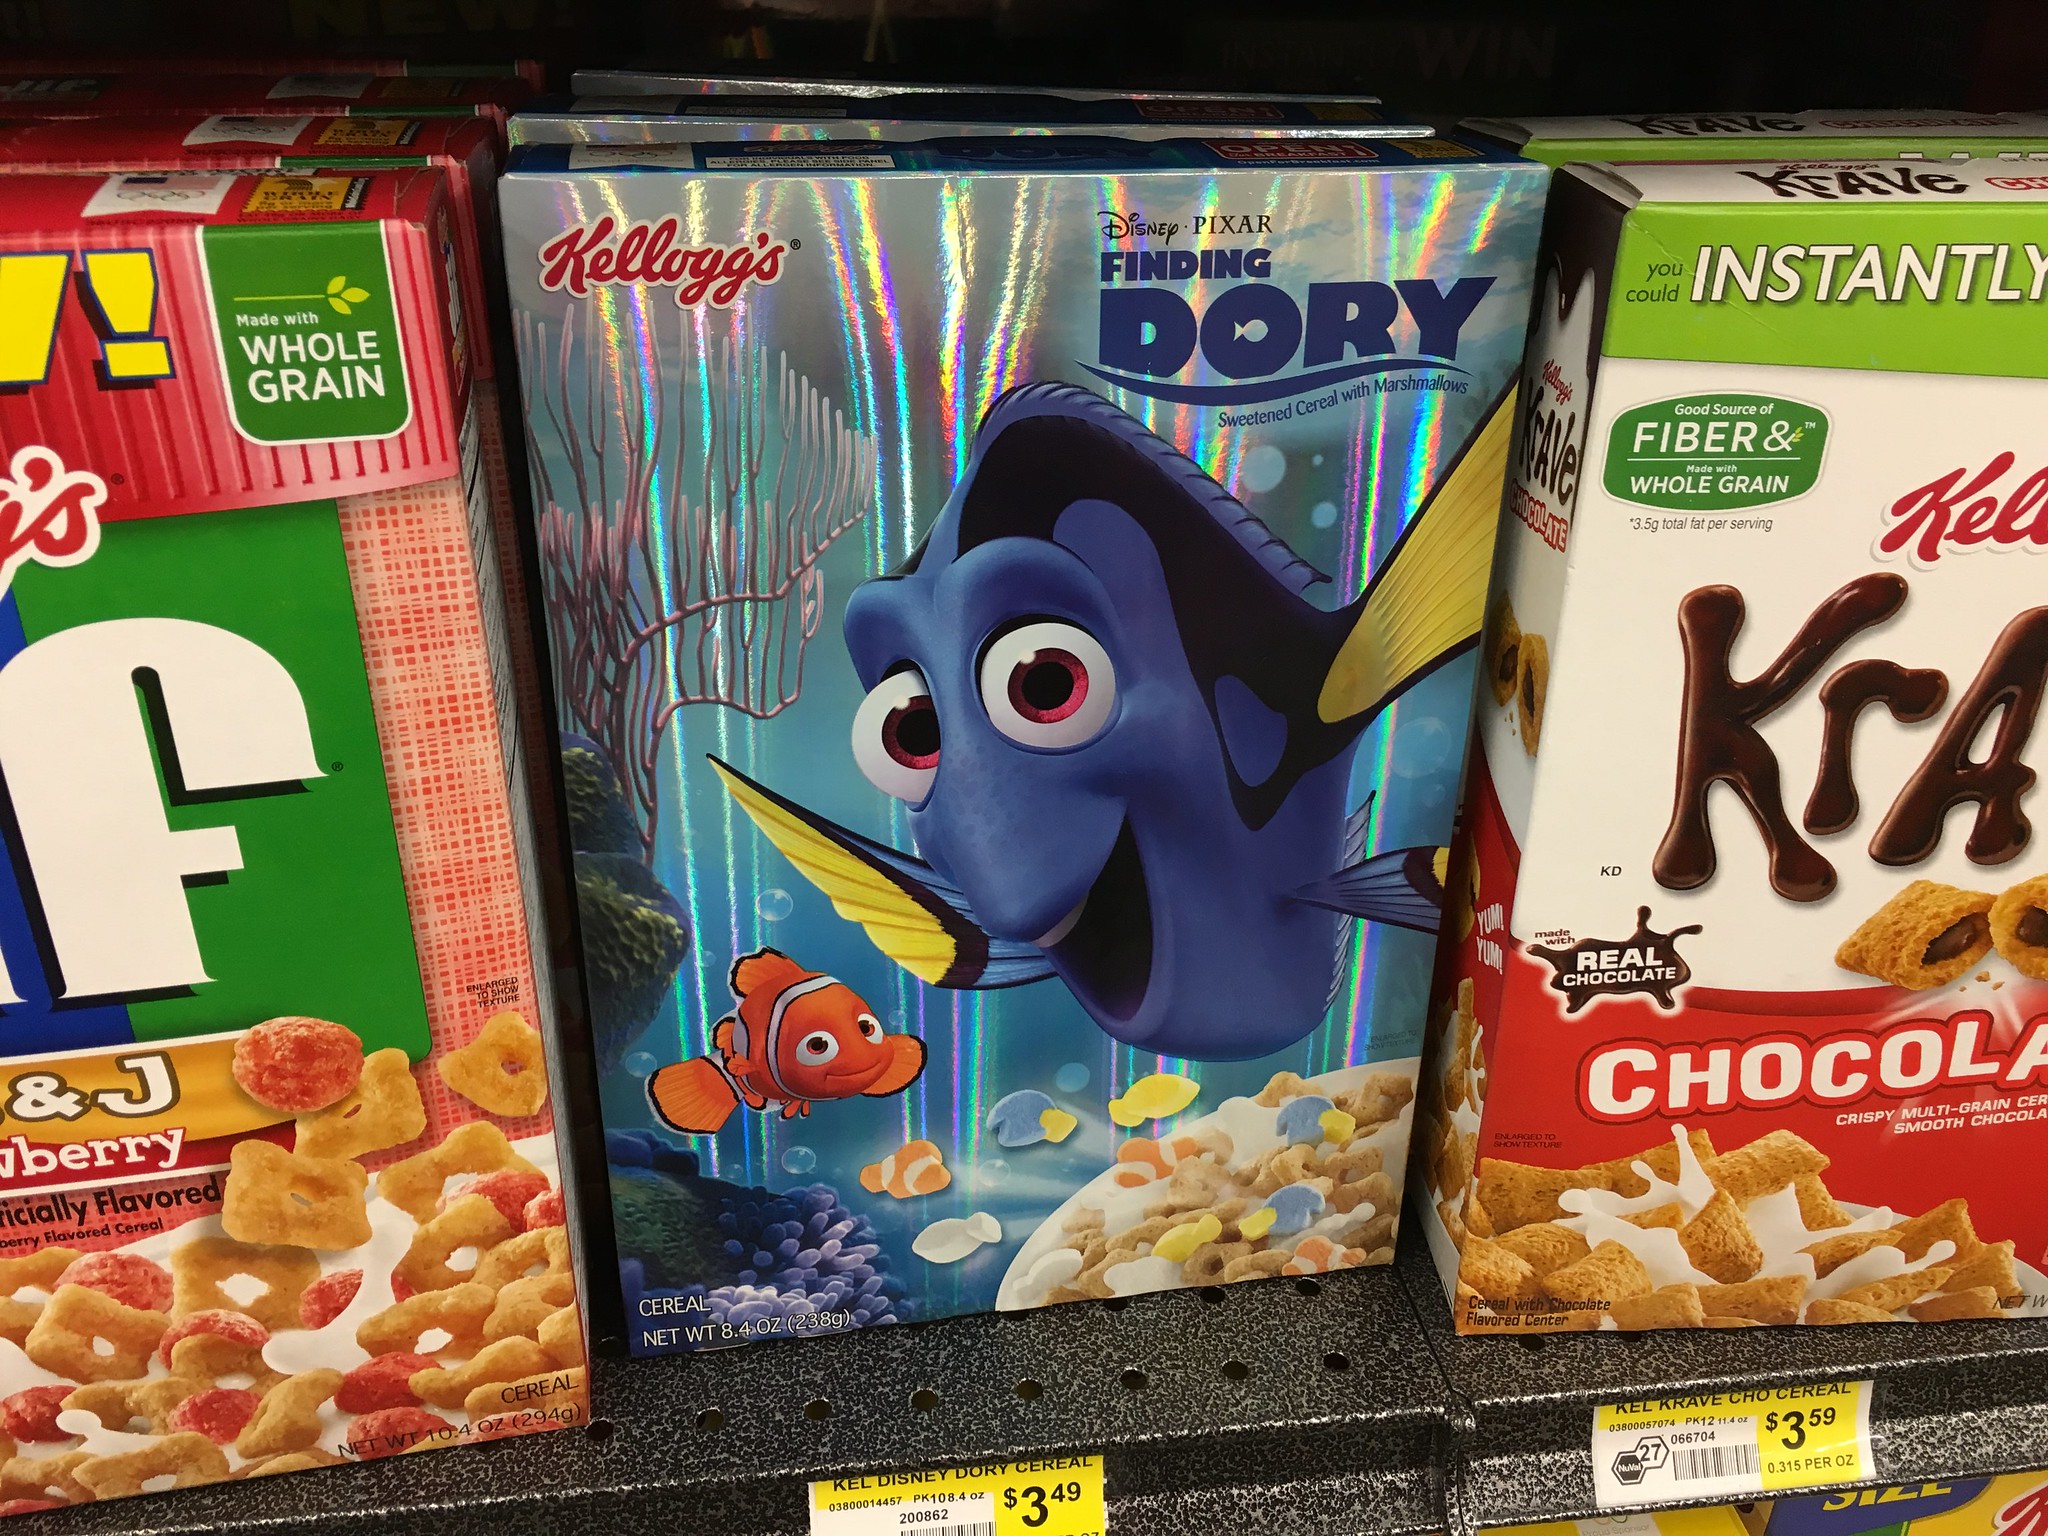 Hey look. Finding Dory cereal